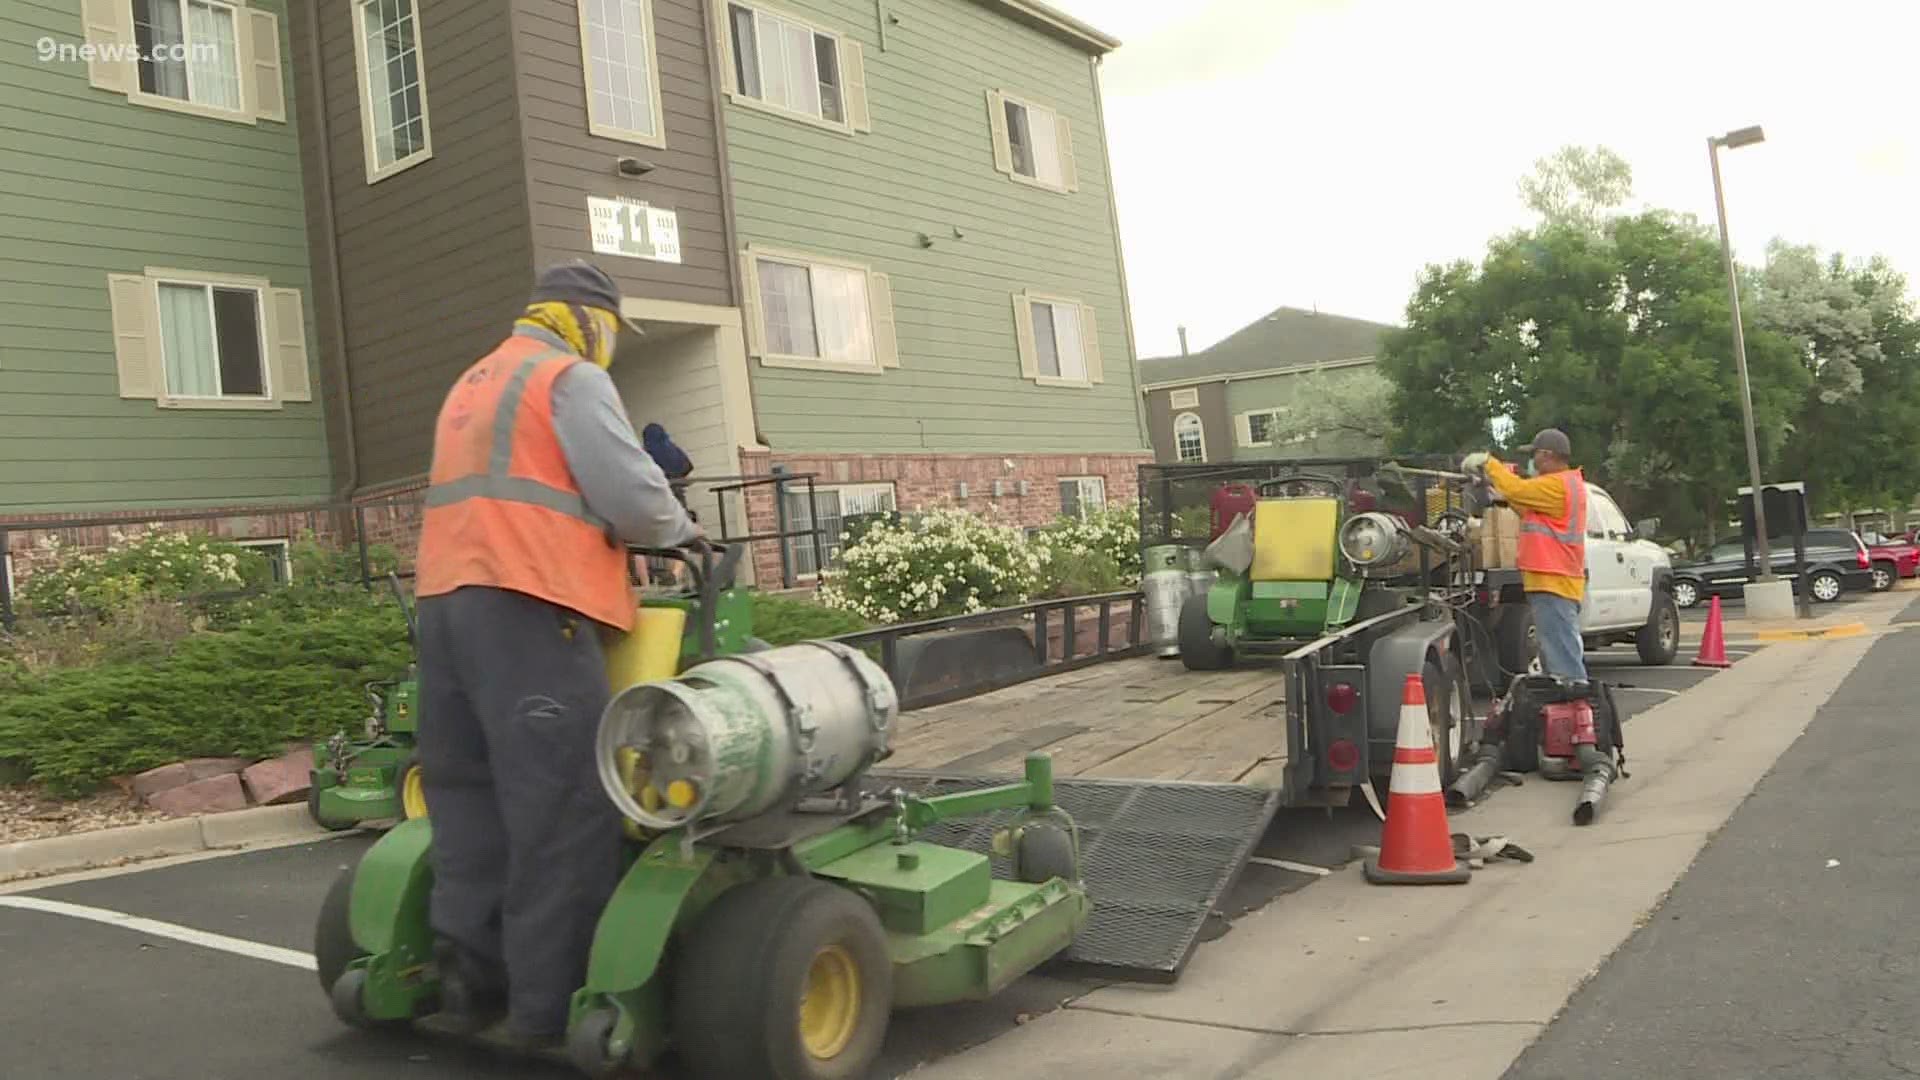 The Associated Landscape Contractors of Colorado believes this impacts "tens of thousands" of workers who usually come to Colorado to work.